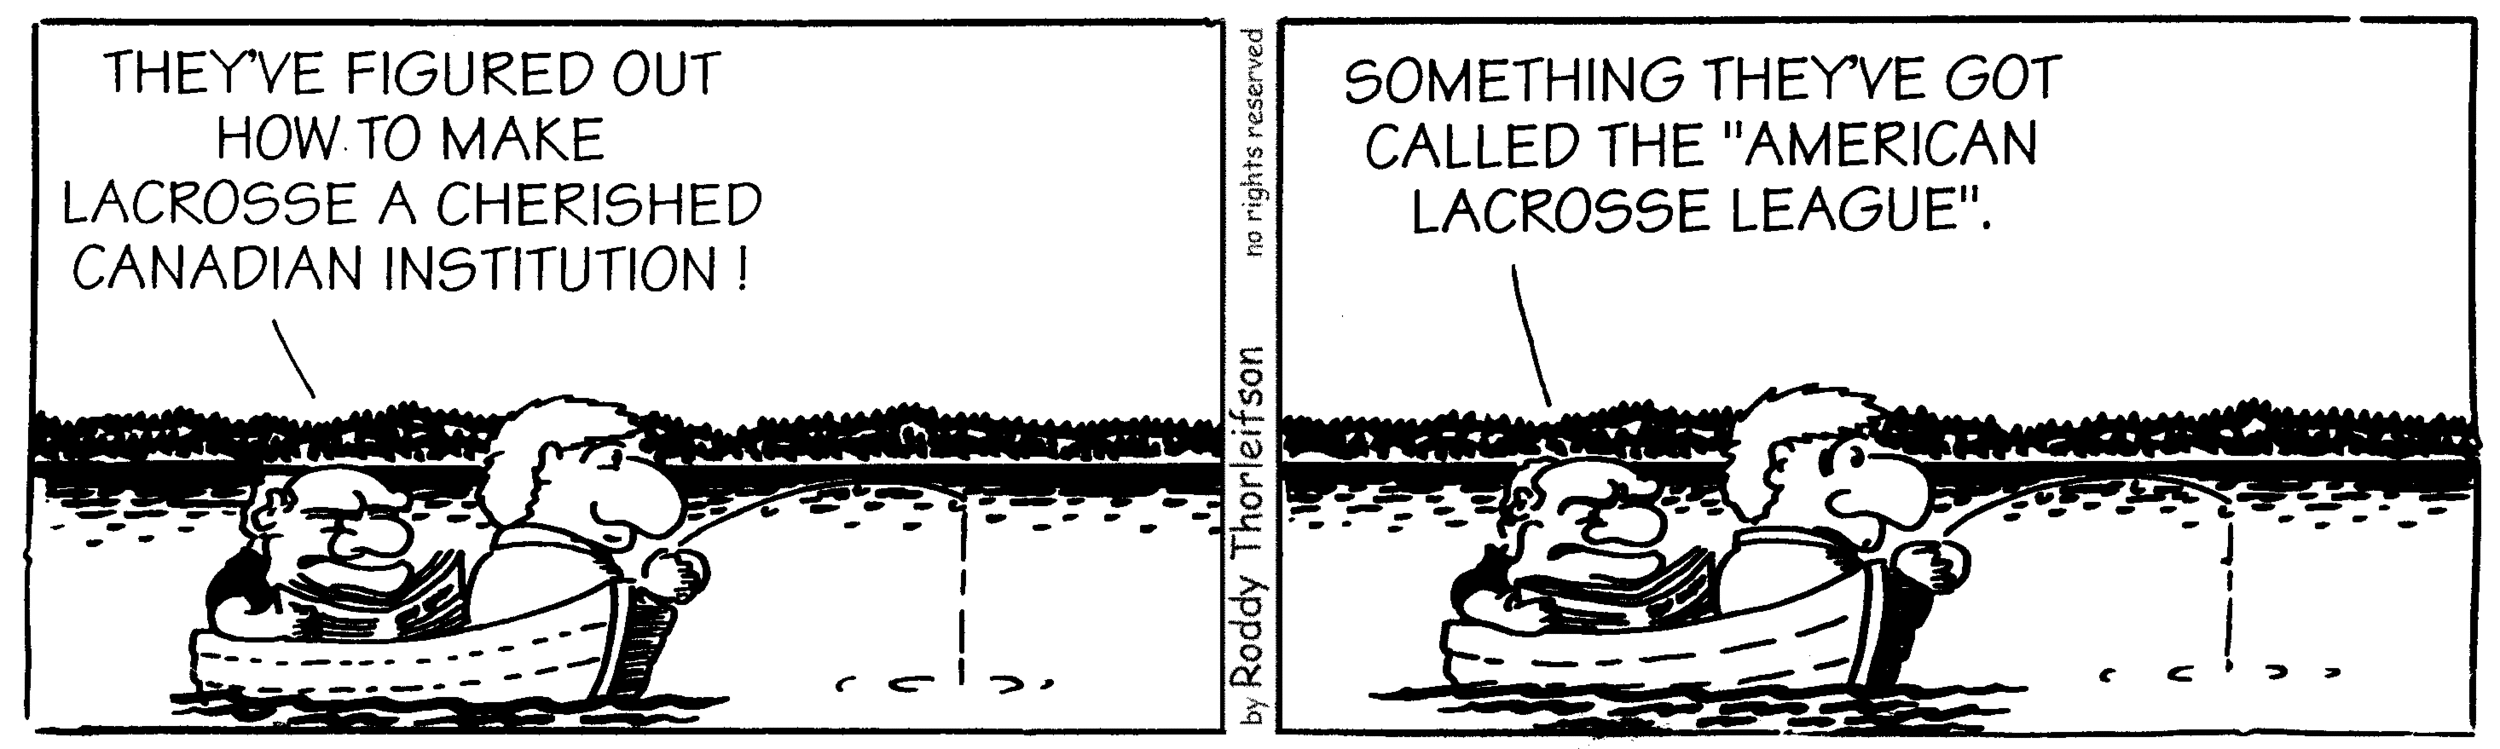 free cartoon Canada Canadian identity making Lacrosse a cherished Canadian institution